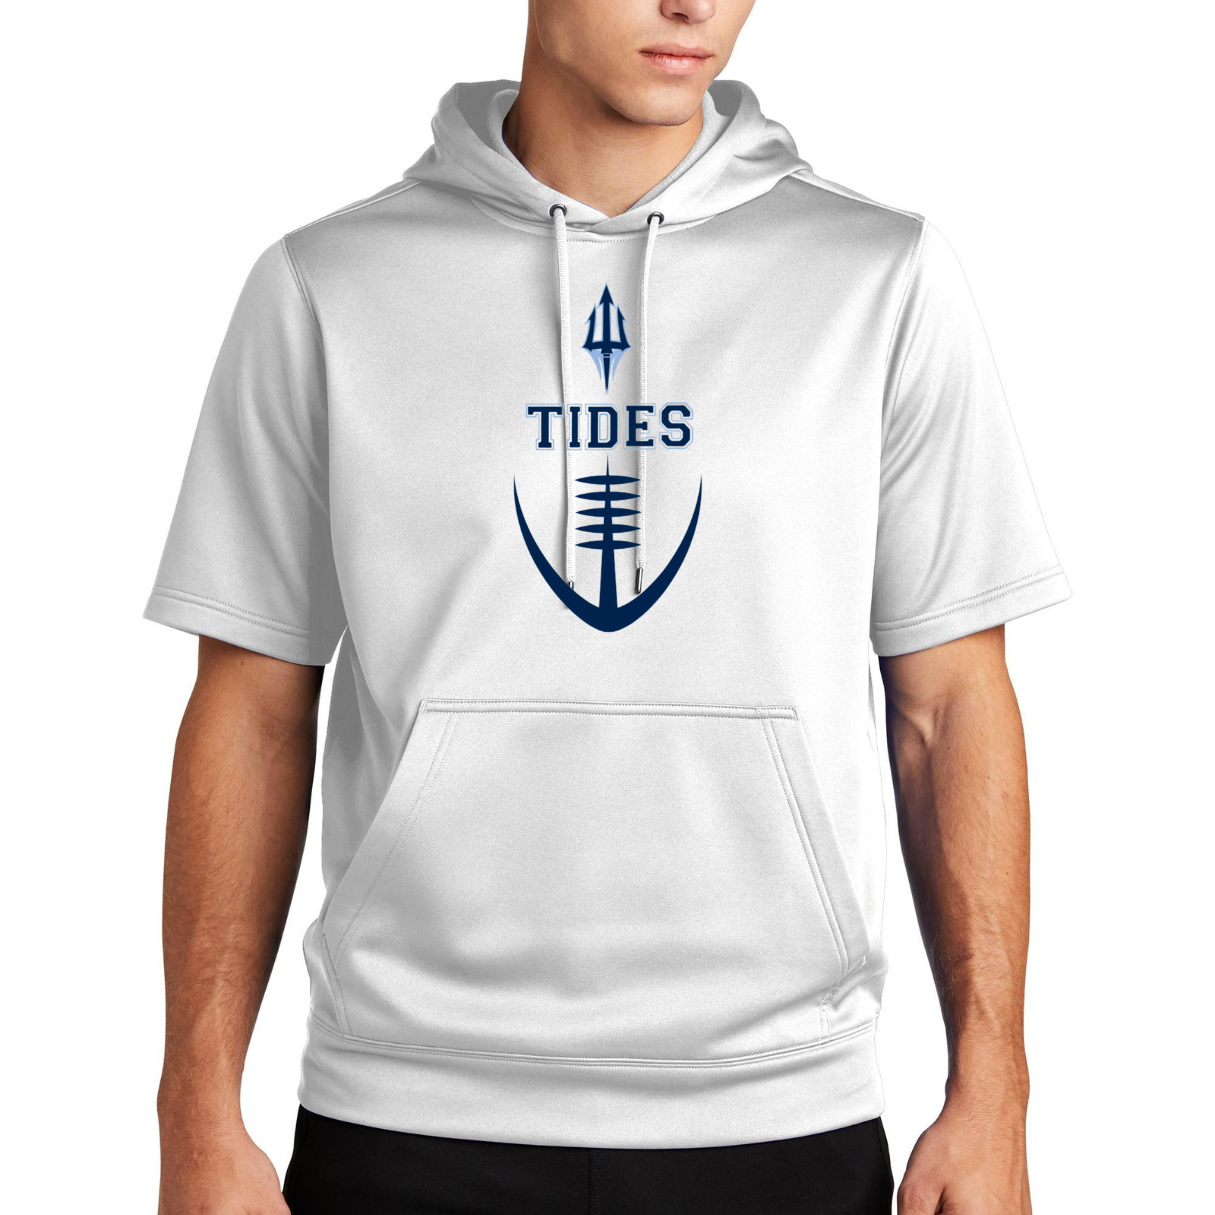 Tides Football Trident Short Sleeved Hooded- Adult and Youth